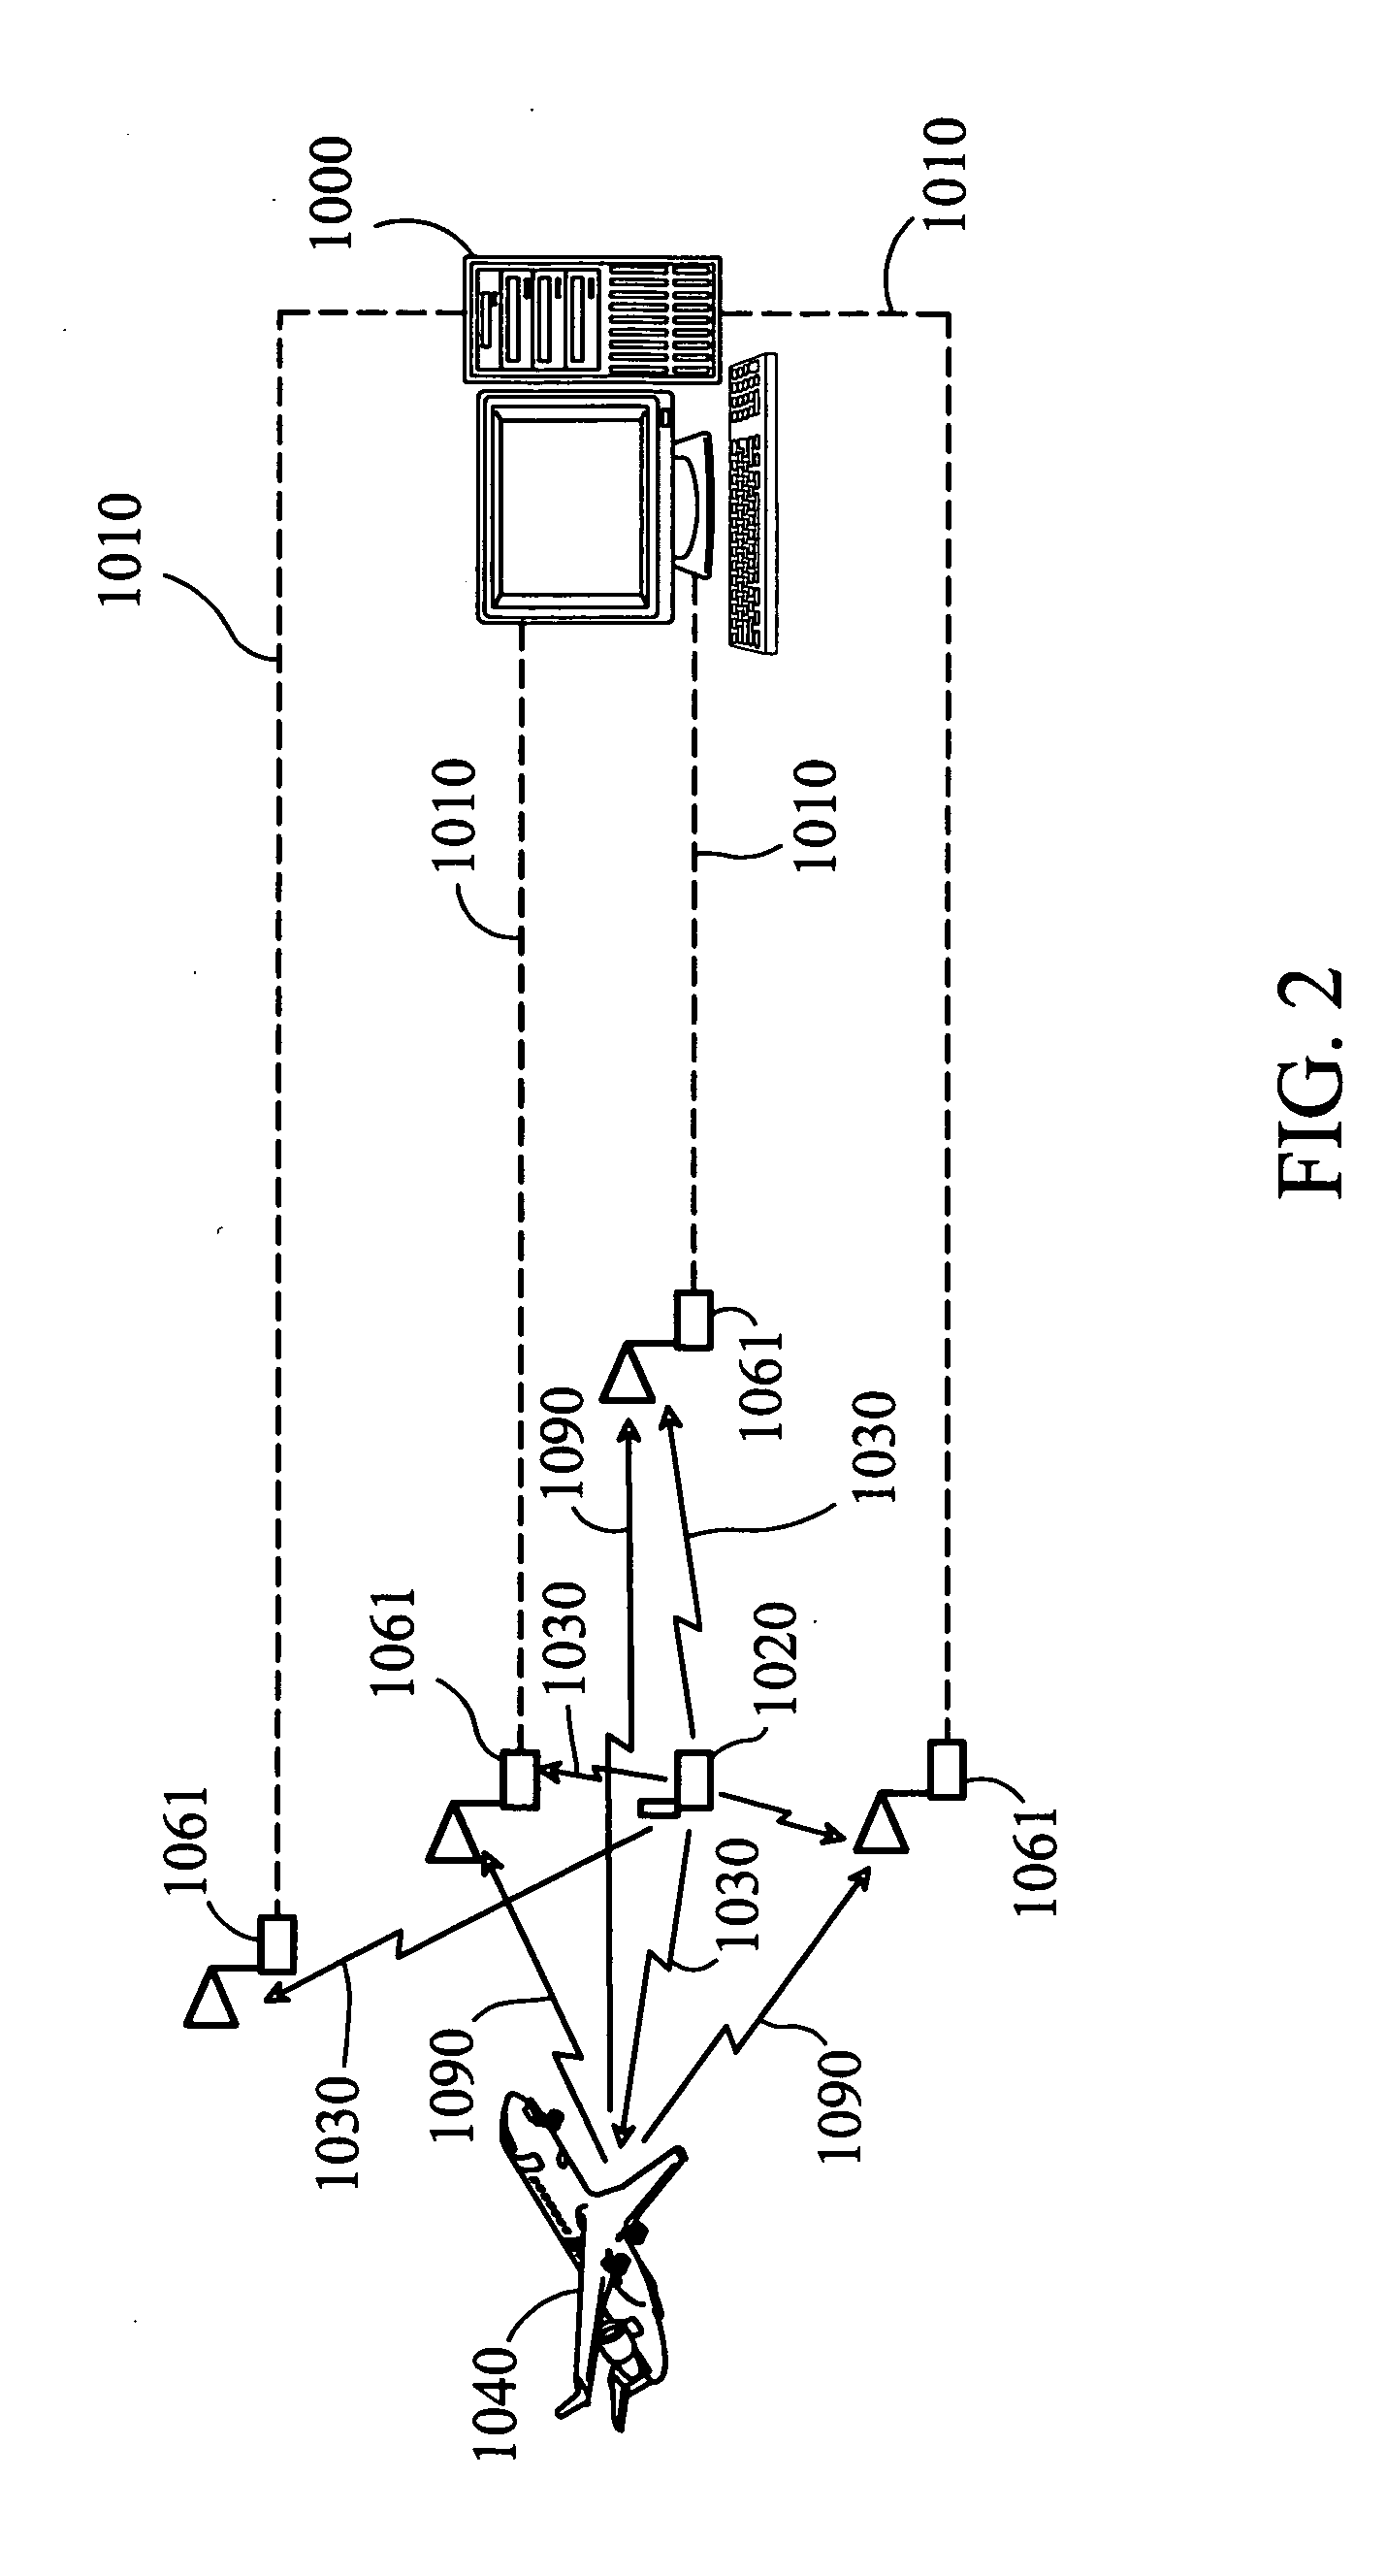 Method and apparatus for ADS-B validation, active and passive multilateration, and elliptical surviellance